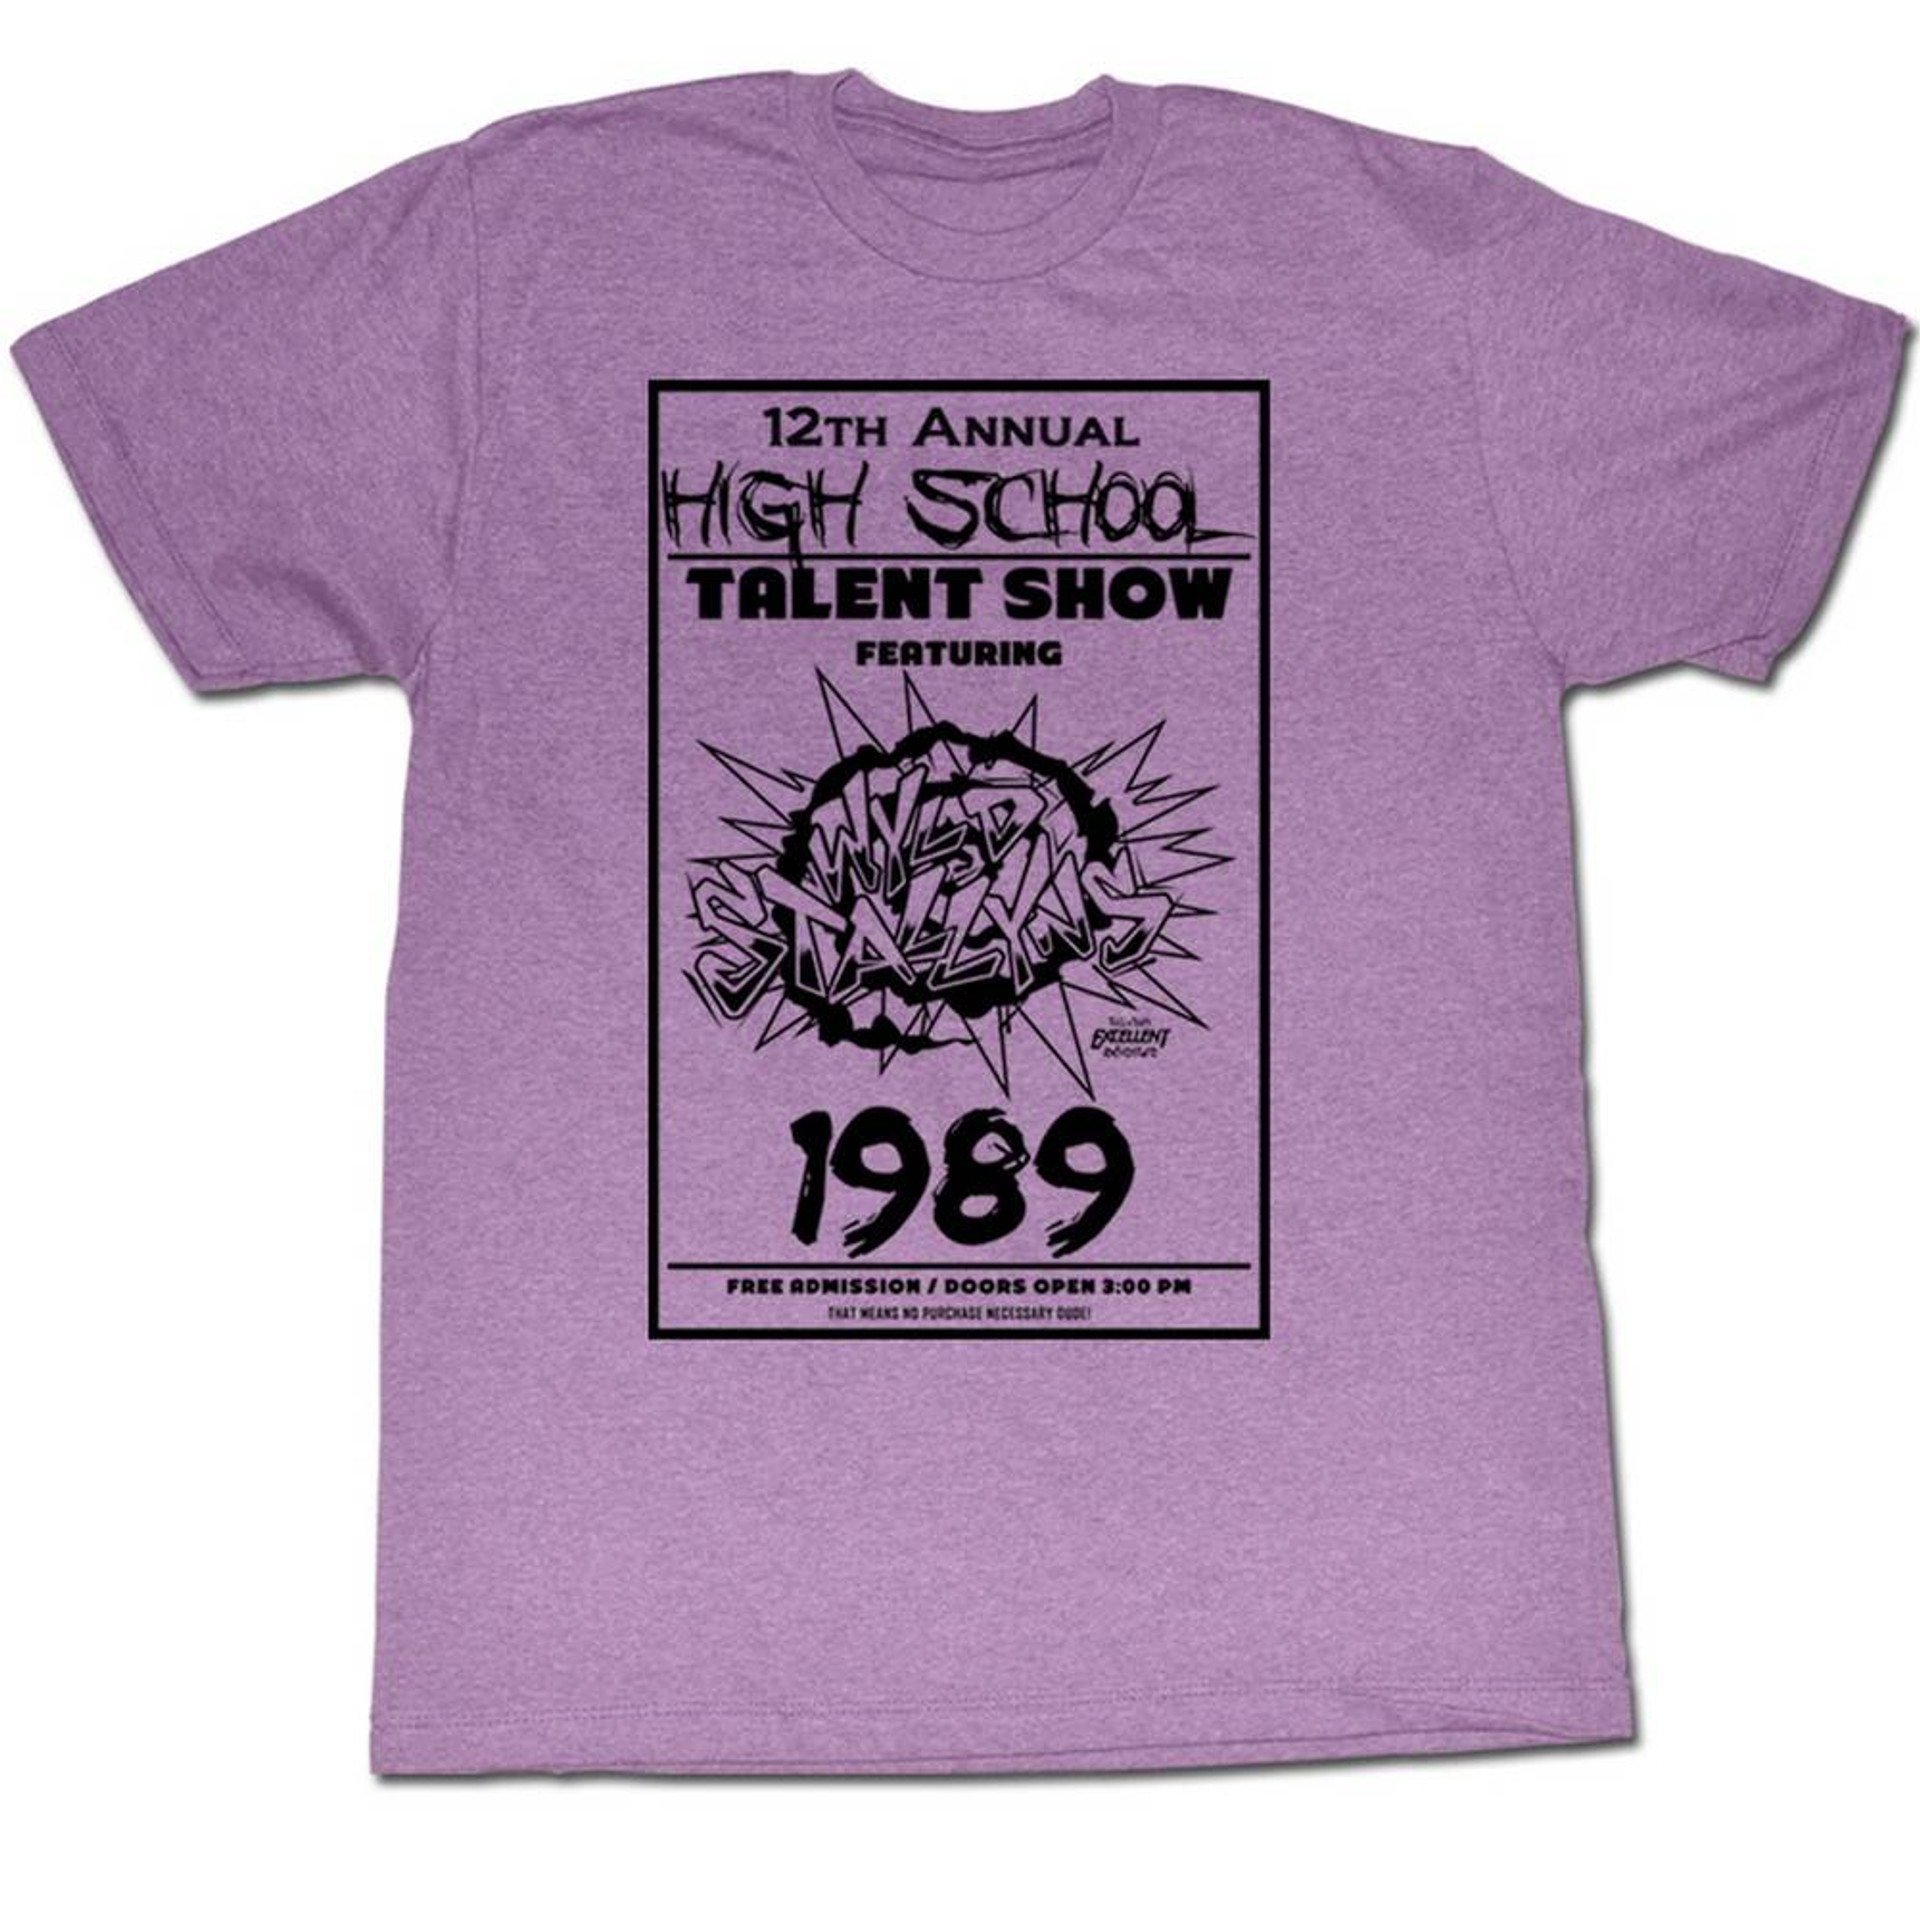 bill and ted the talent show purple heather adult t shirt 3951 cbodo